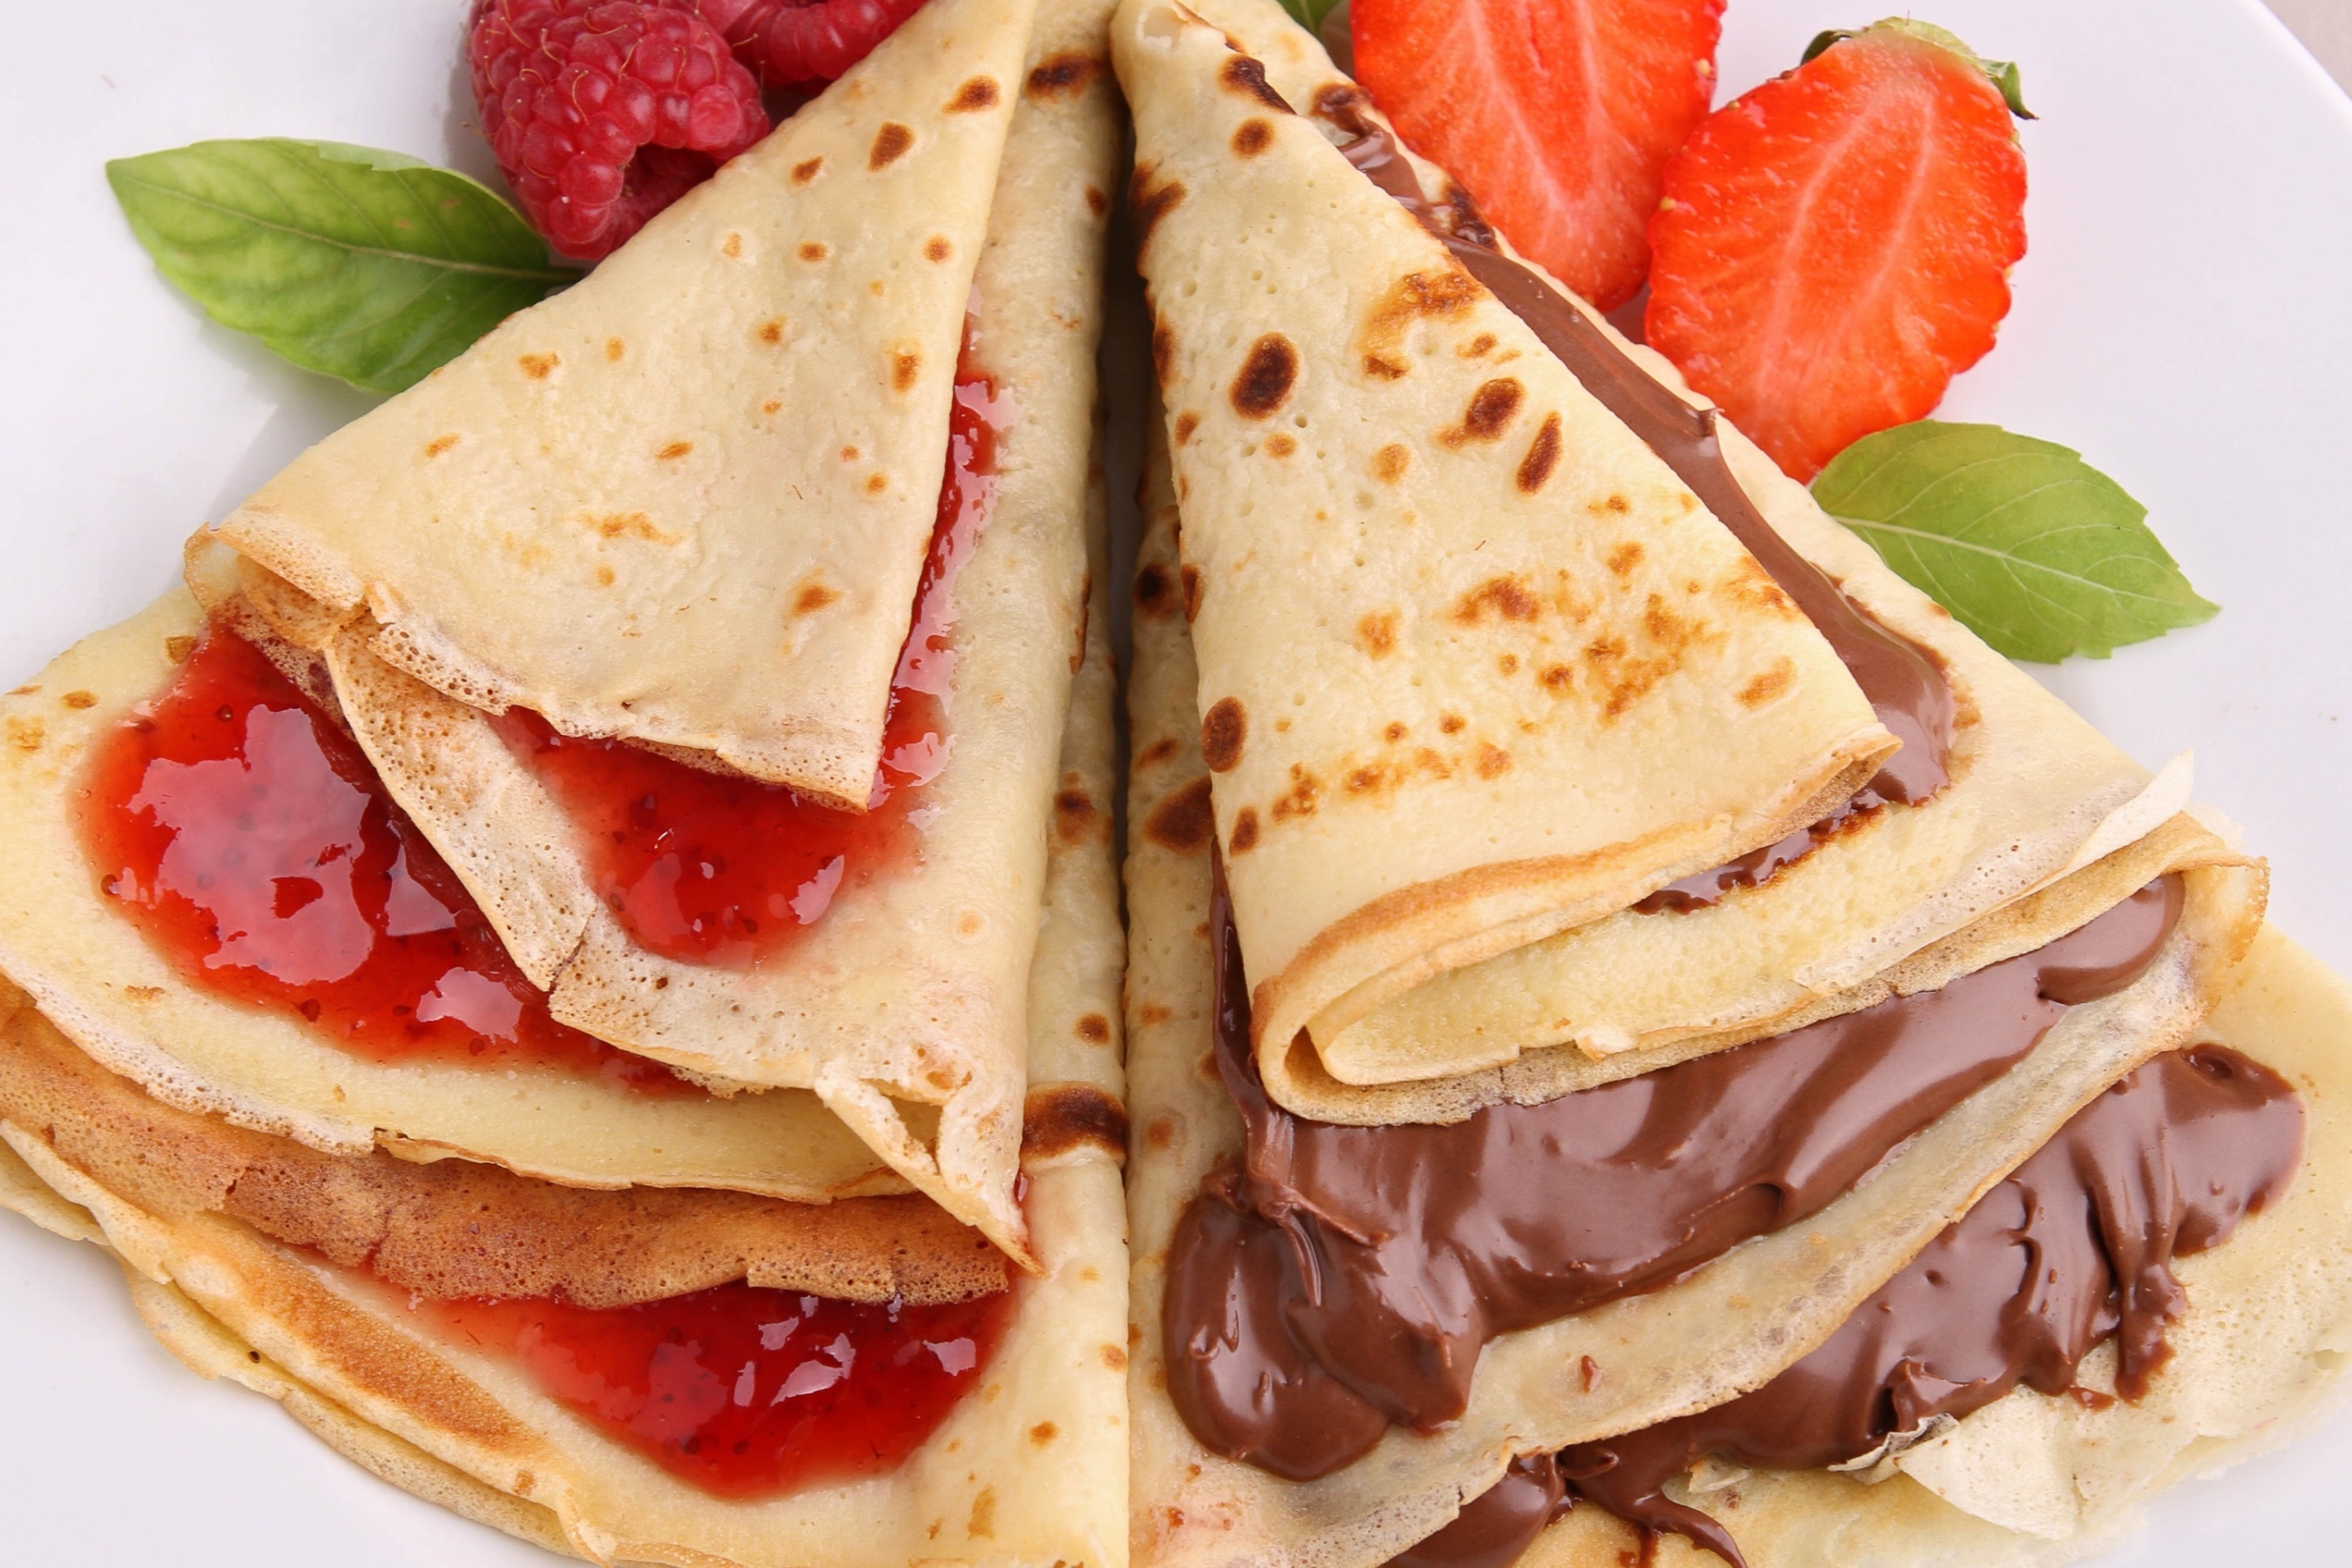 Das Most delicious pancakes with jam Wallpaper 2880x1920